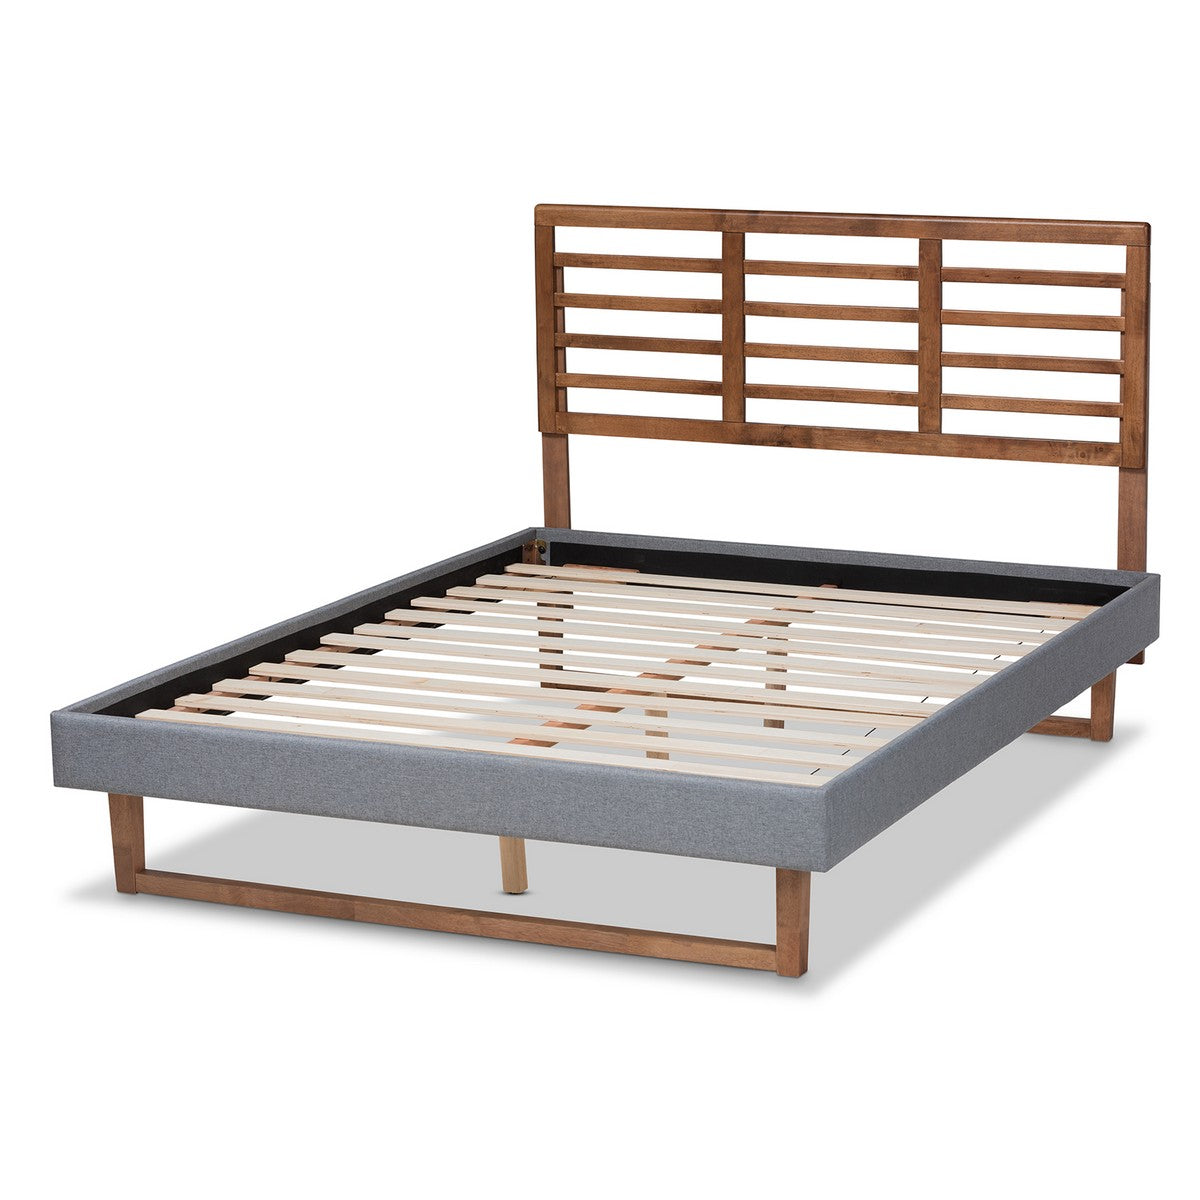 Baxton Studio Rina Modern and Contemporary Dark Grey Fabric Upholstered and Ash Walnut Brown Finished Wood Queen Size Platform Bed